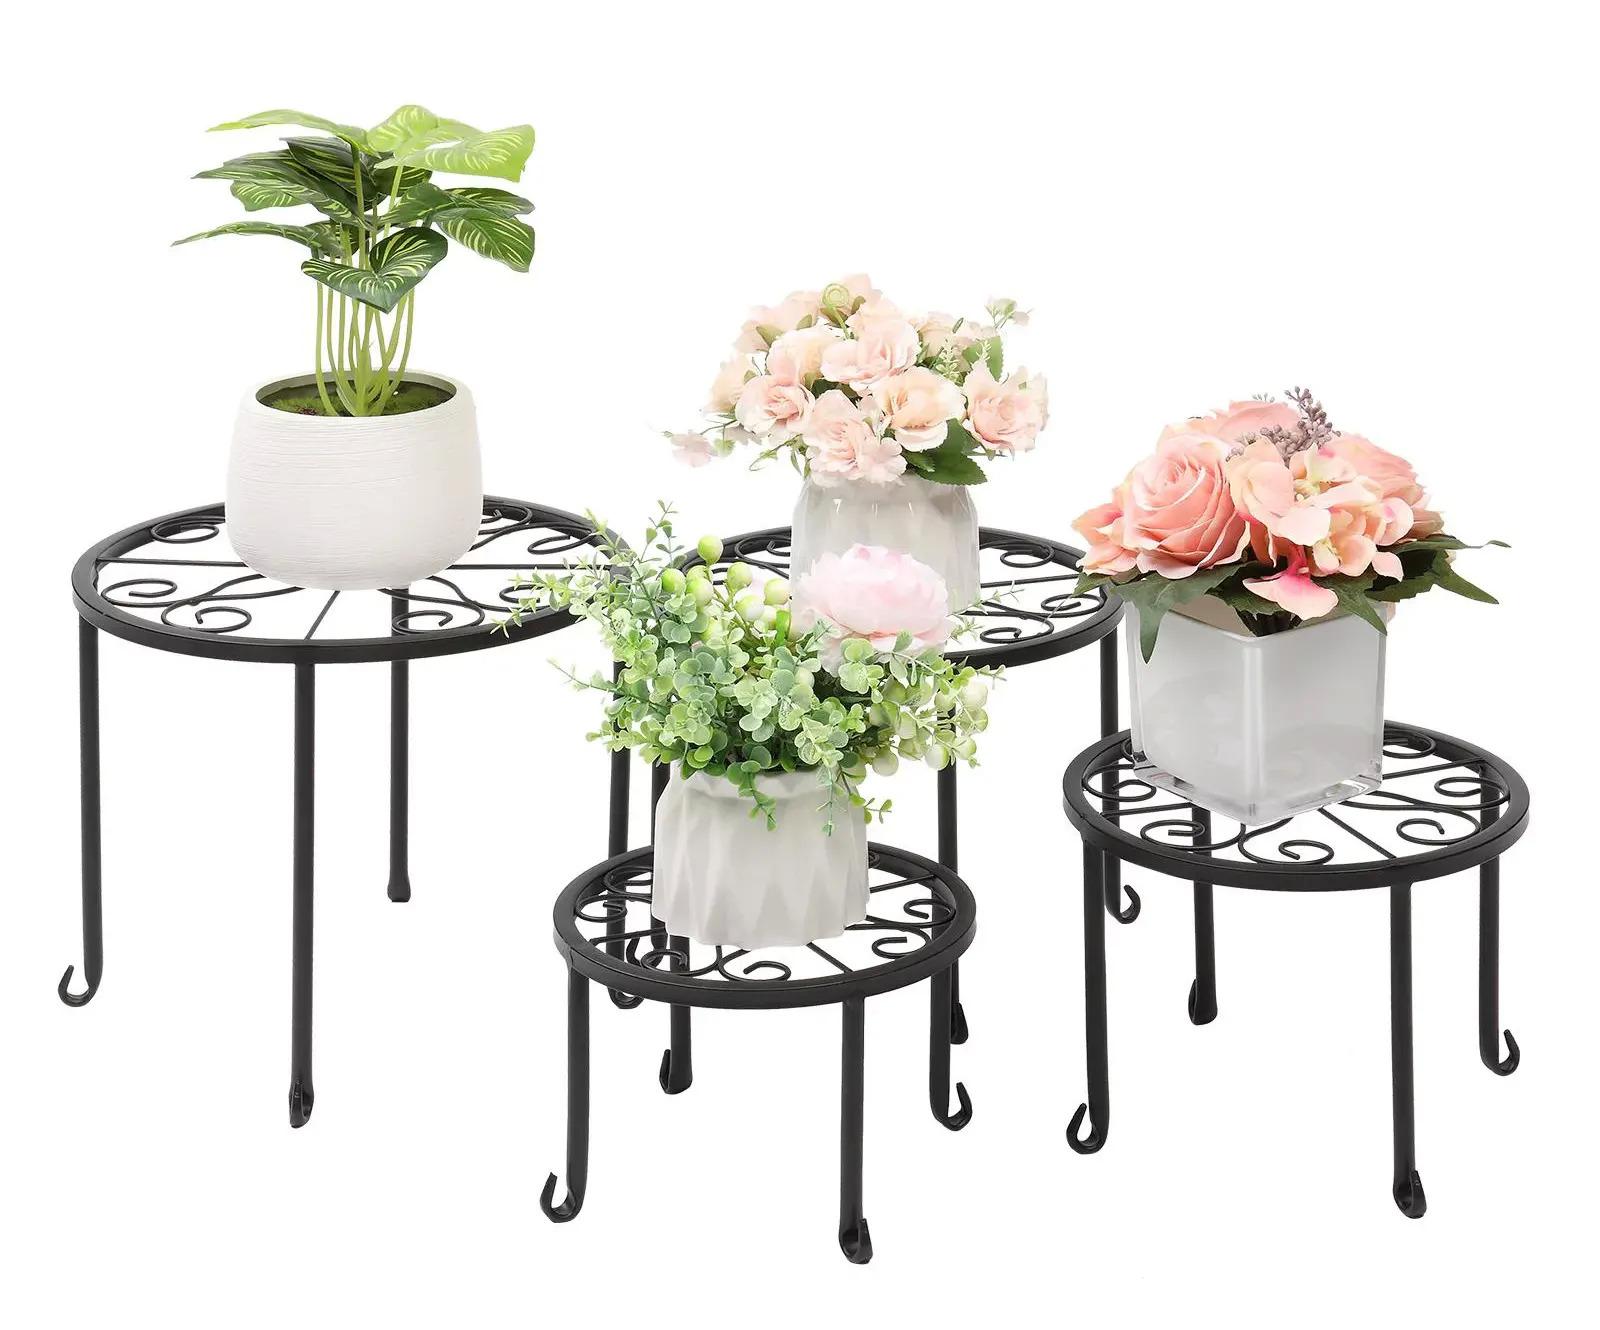 Ktaxon Cast Iron Round Nesting Plant Stand with Scroll Pattern 4 Pack for $21.99